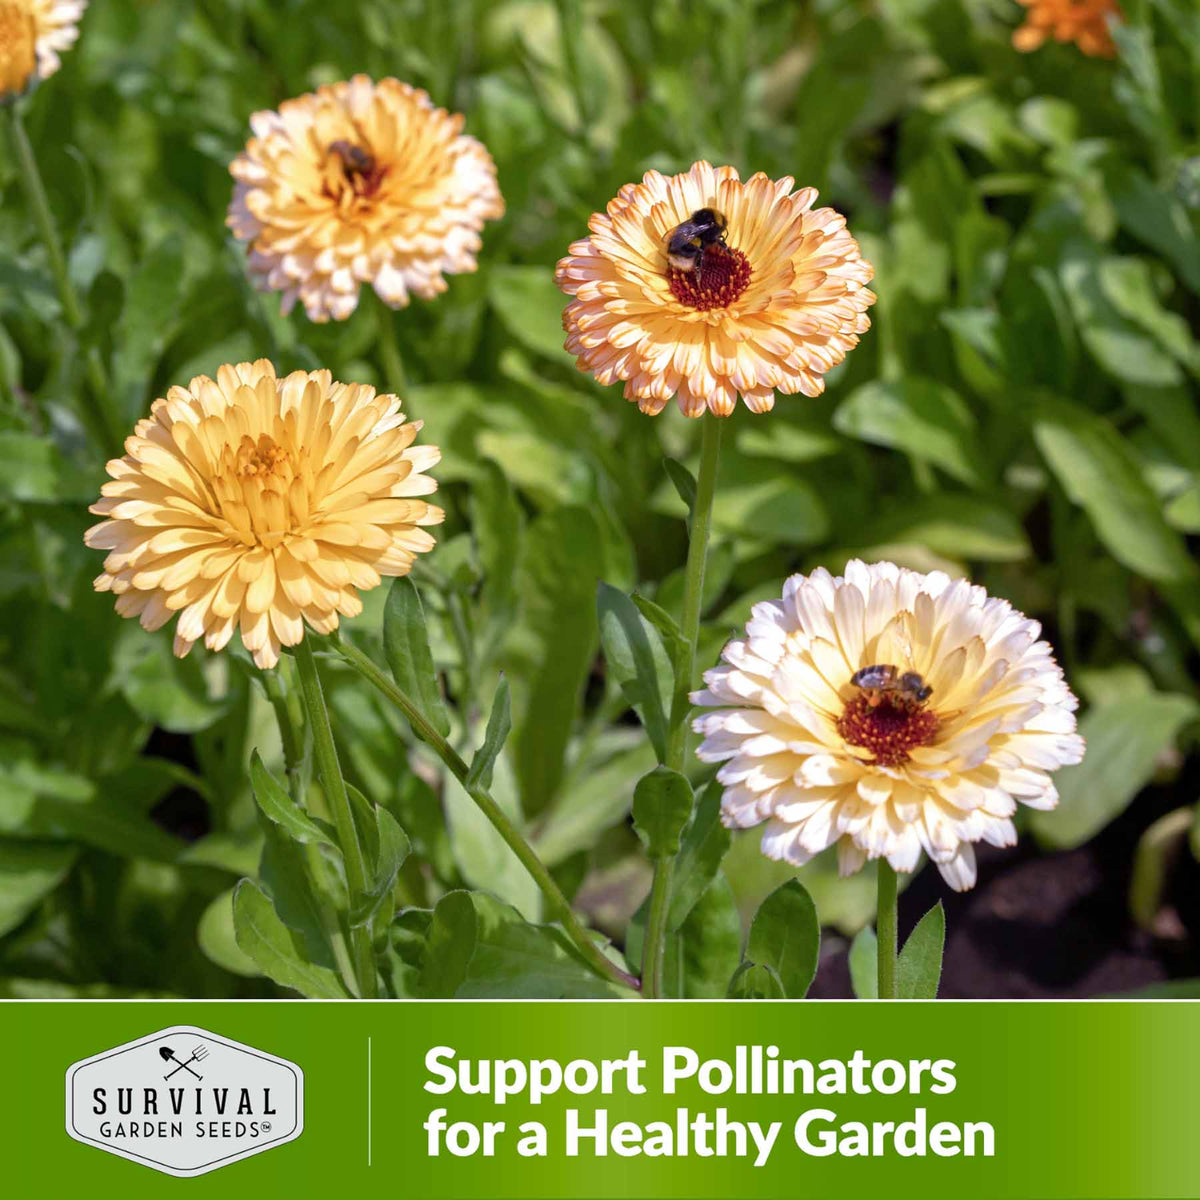 Support pollinators for a healthy garden